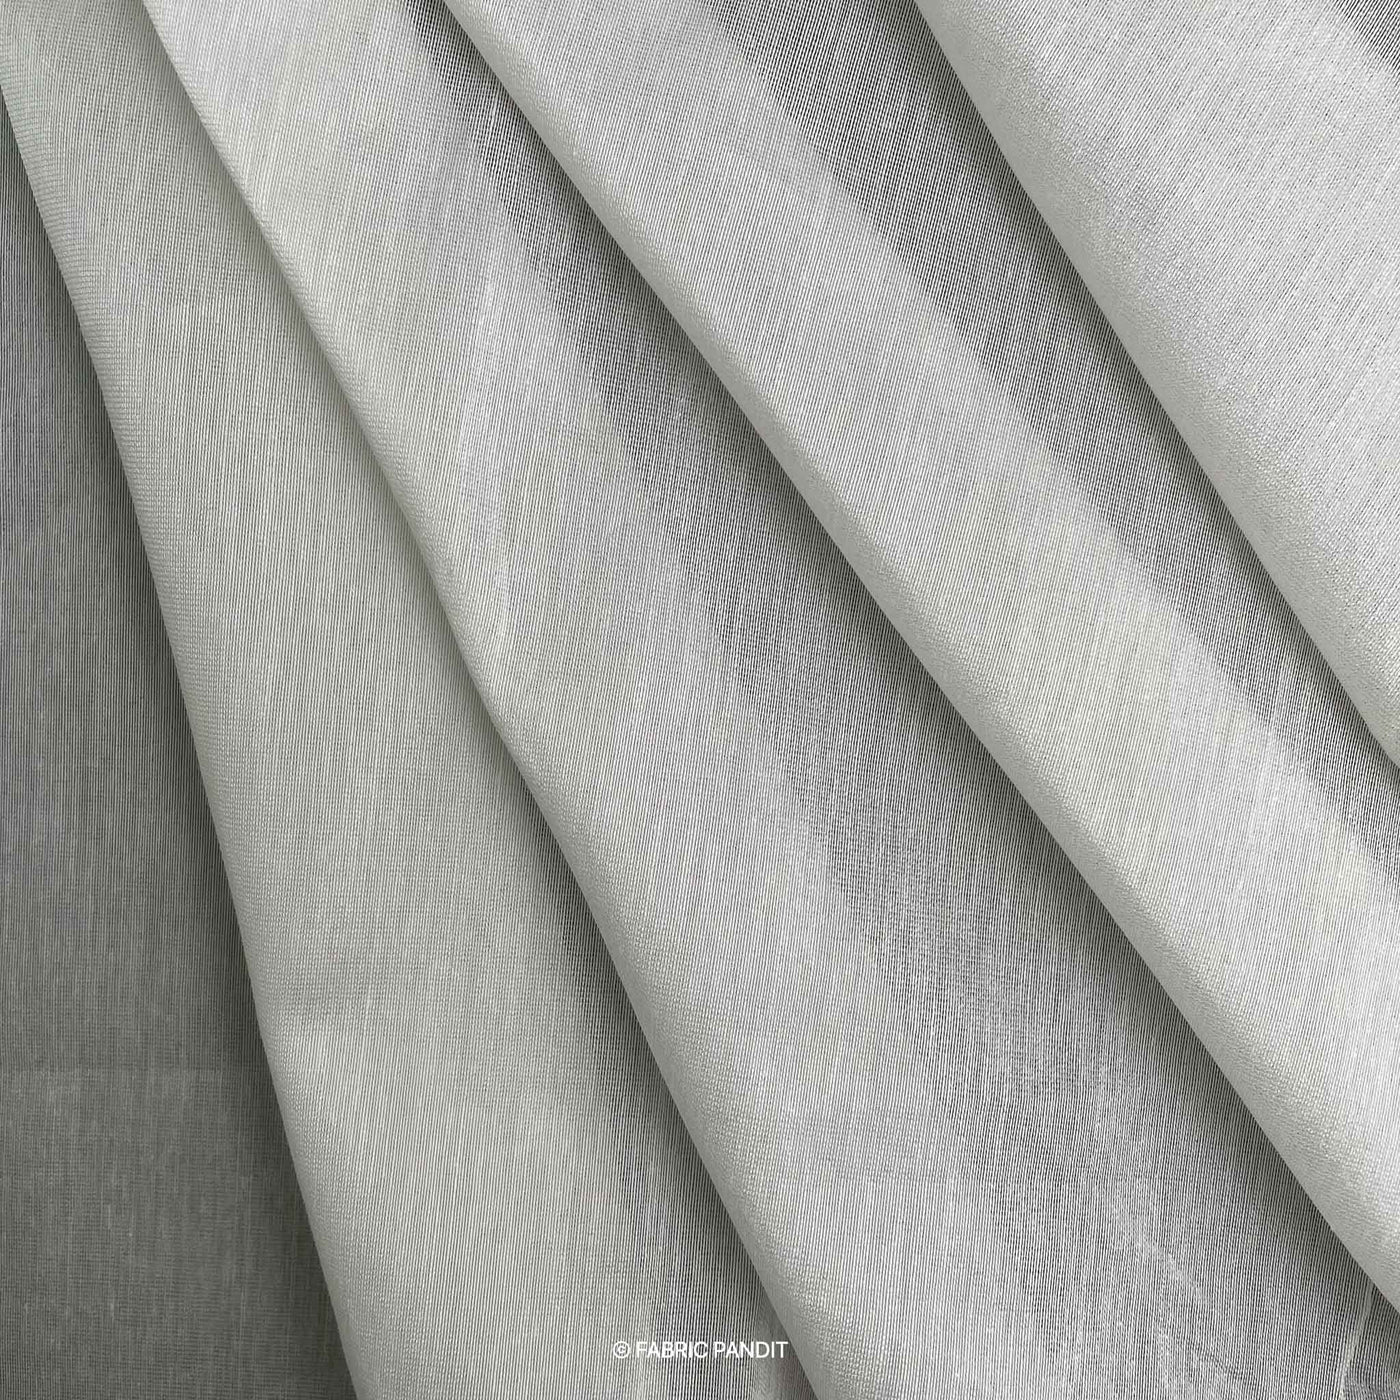 Dyeable Fabric Cut Piece (CUT PIECE) White Dyeable Pure Silk Chanderi Plain Fabric (Width 44 inches)